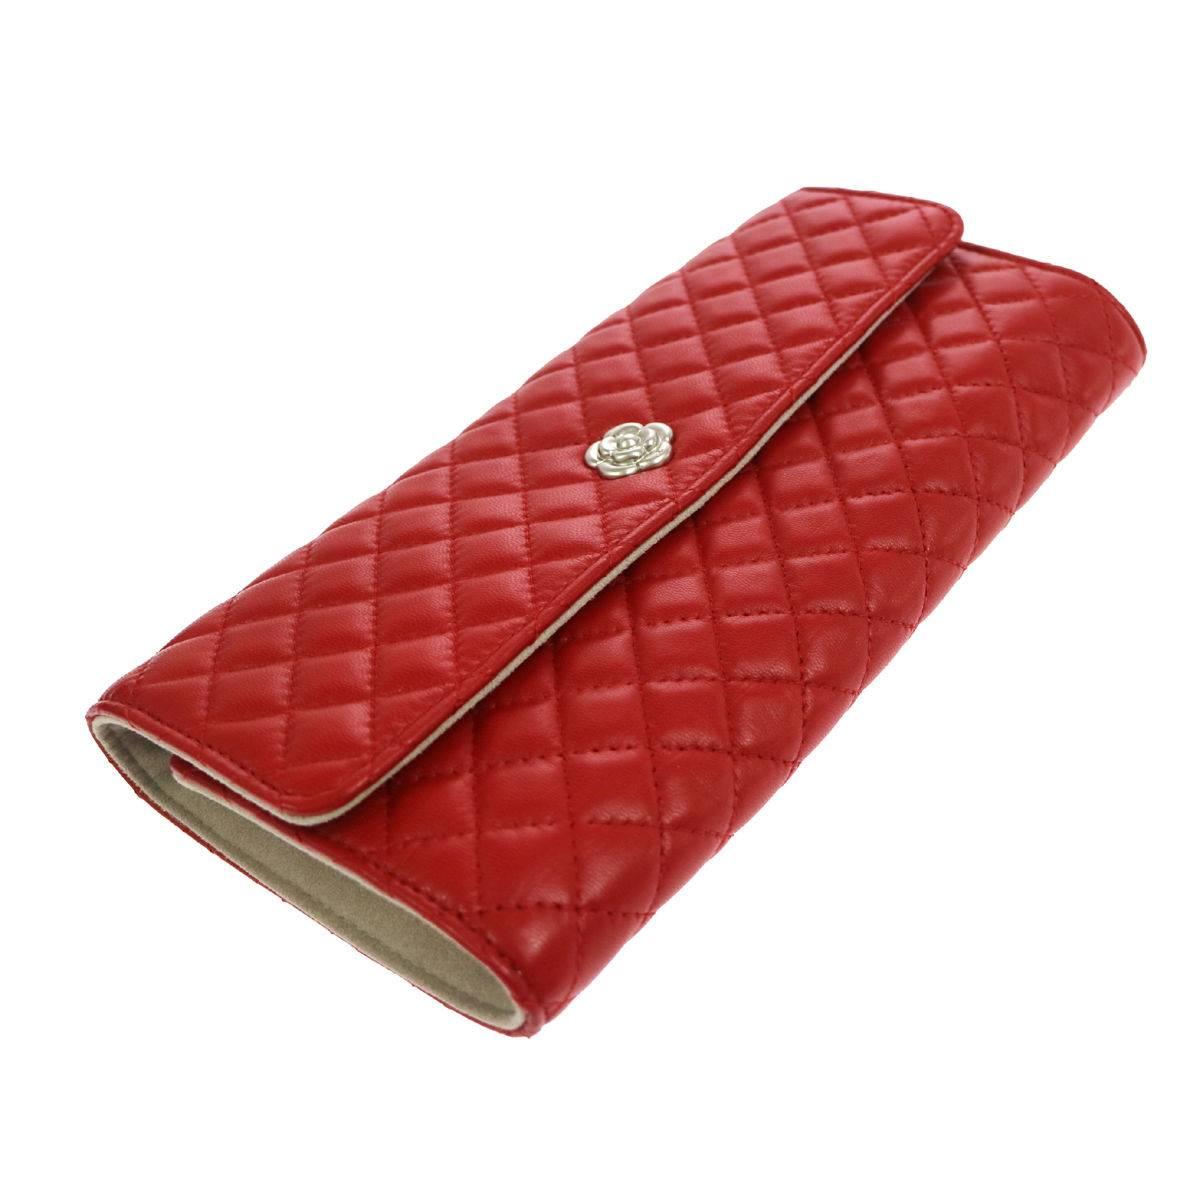 Chanel NEW Red Lambskin Jewelry Case Travel Clutch Bag Roll Box